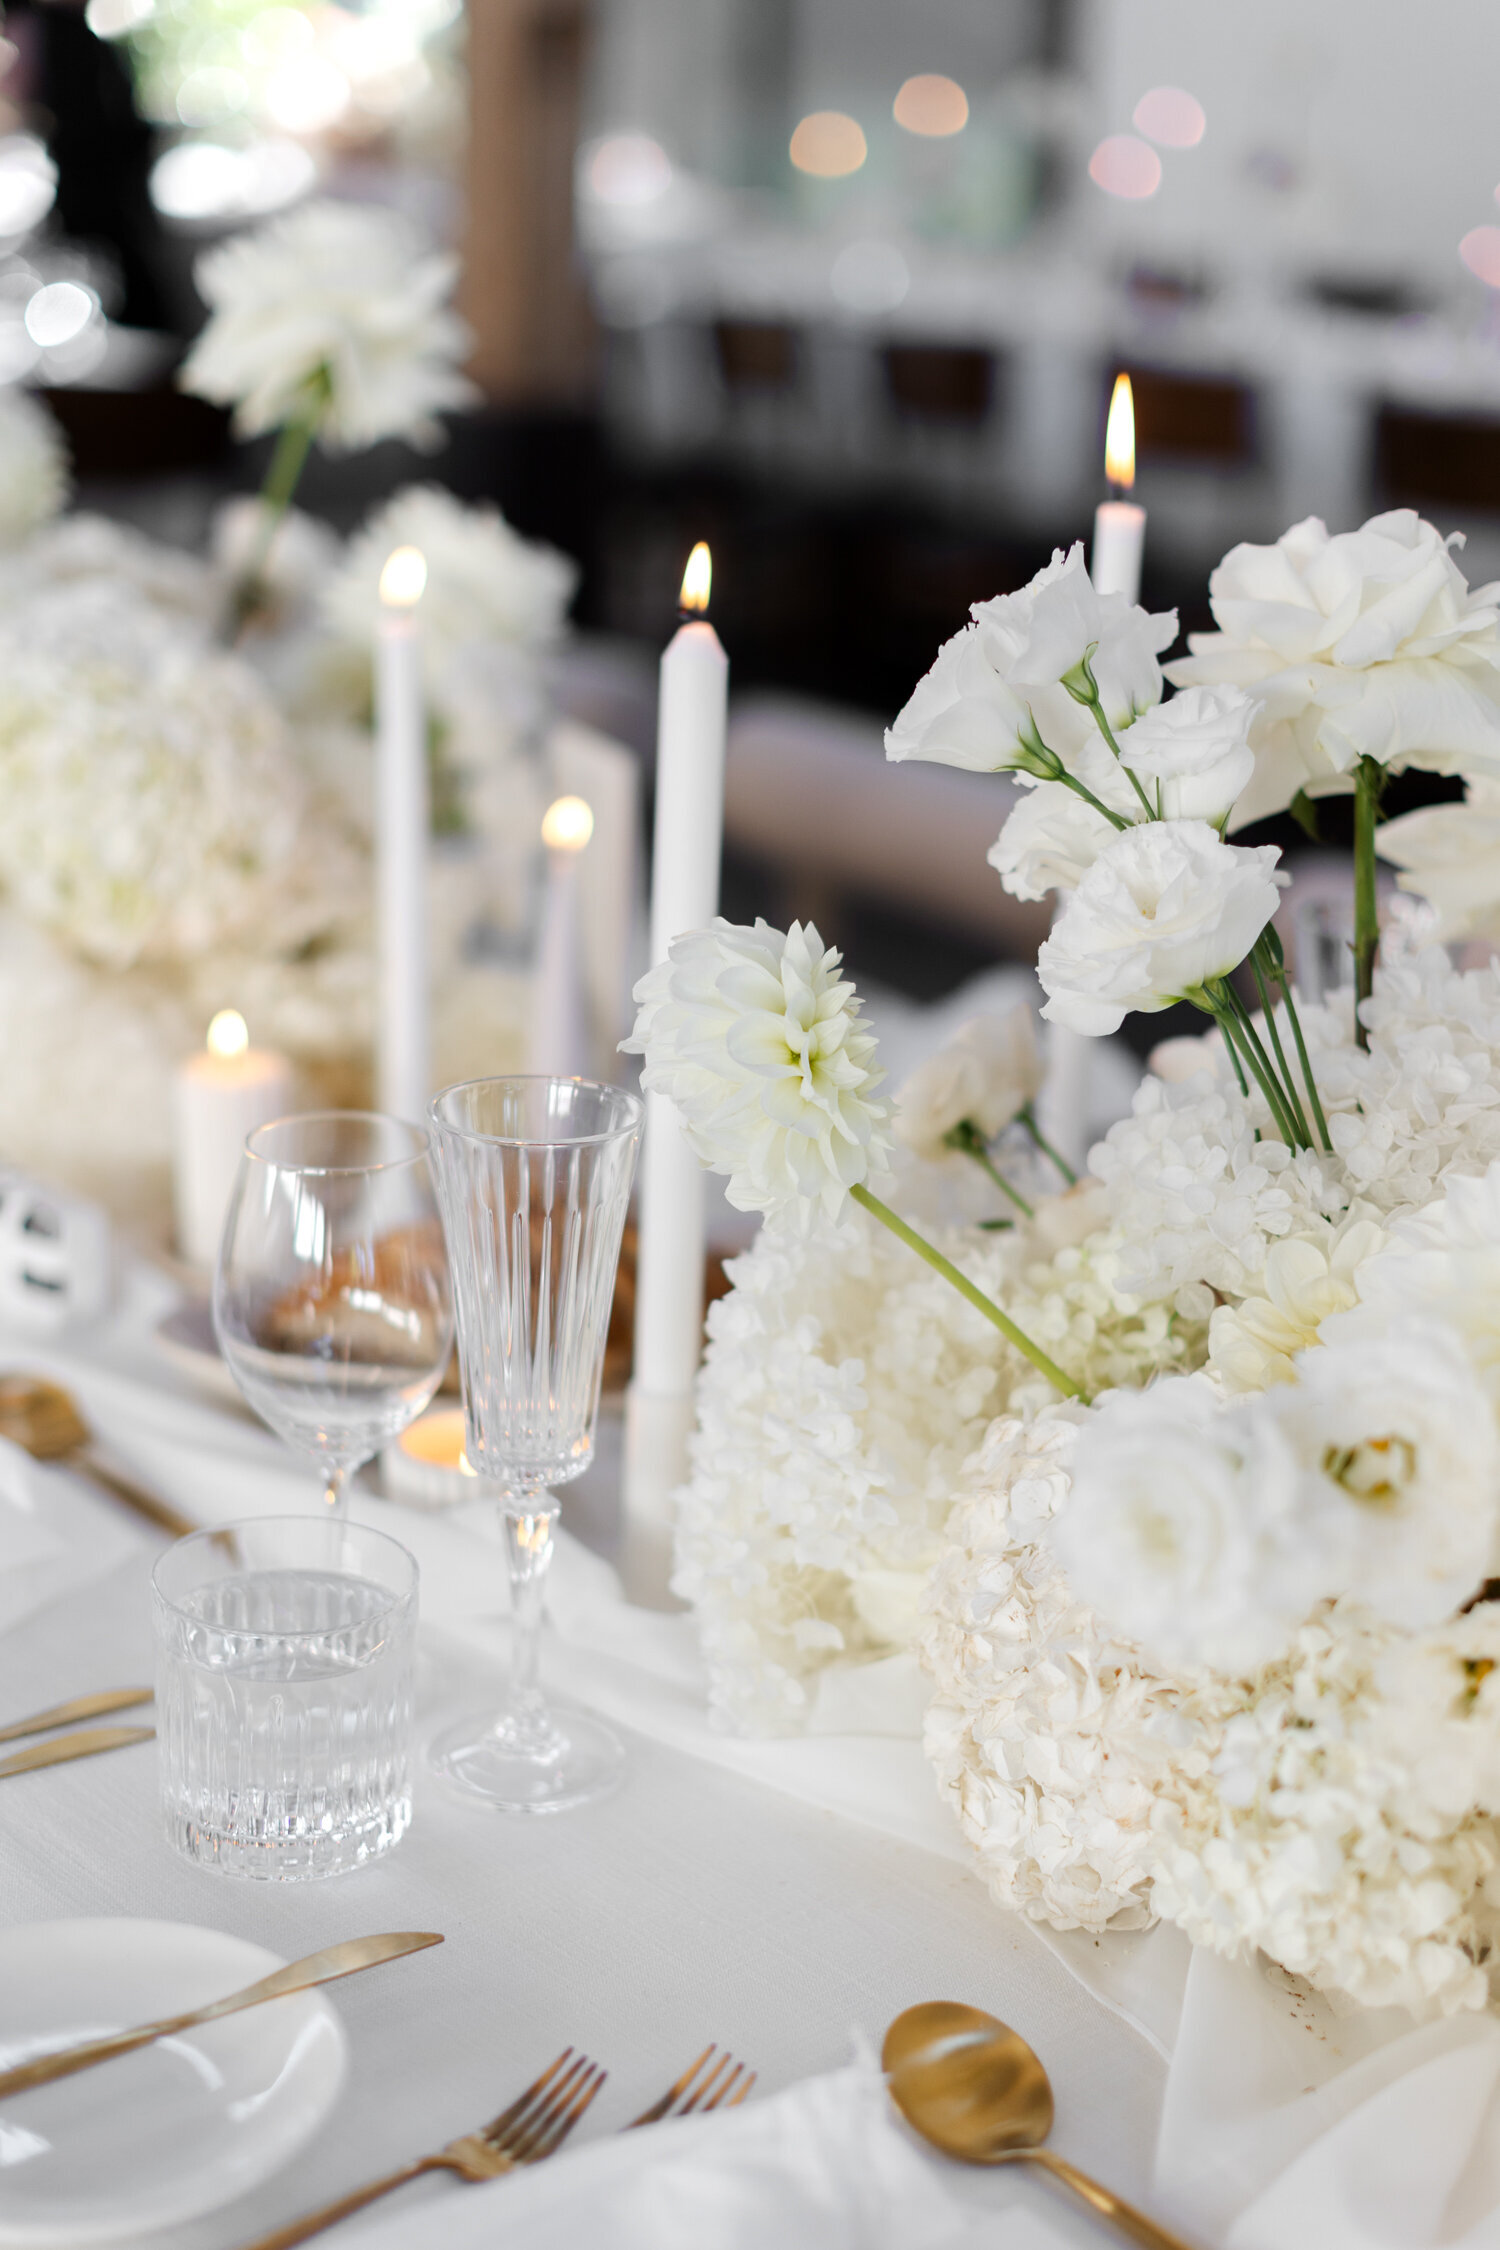 Reception table setting in classic tones